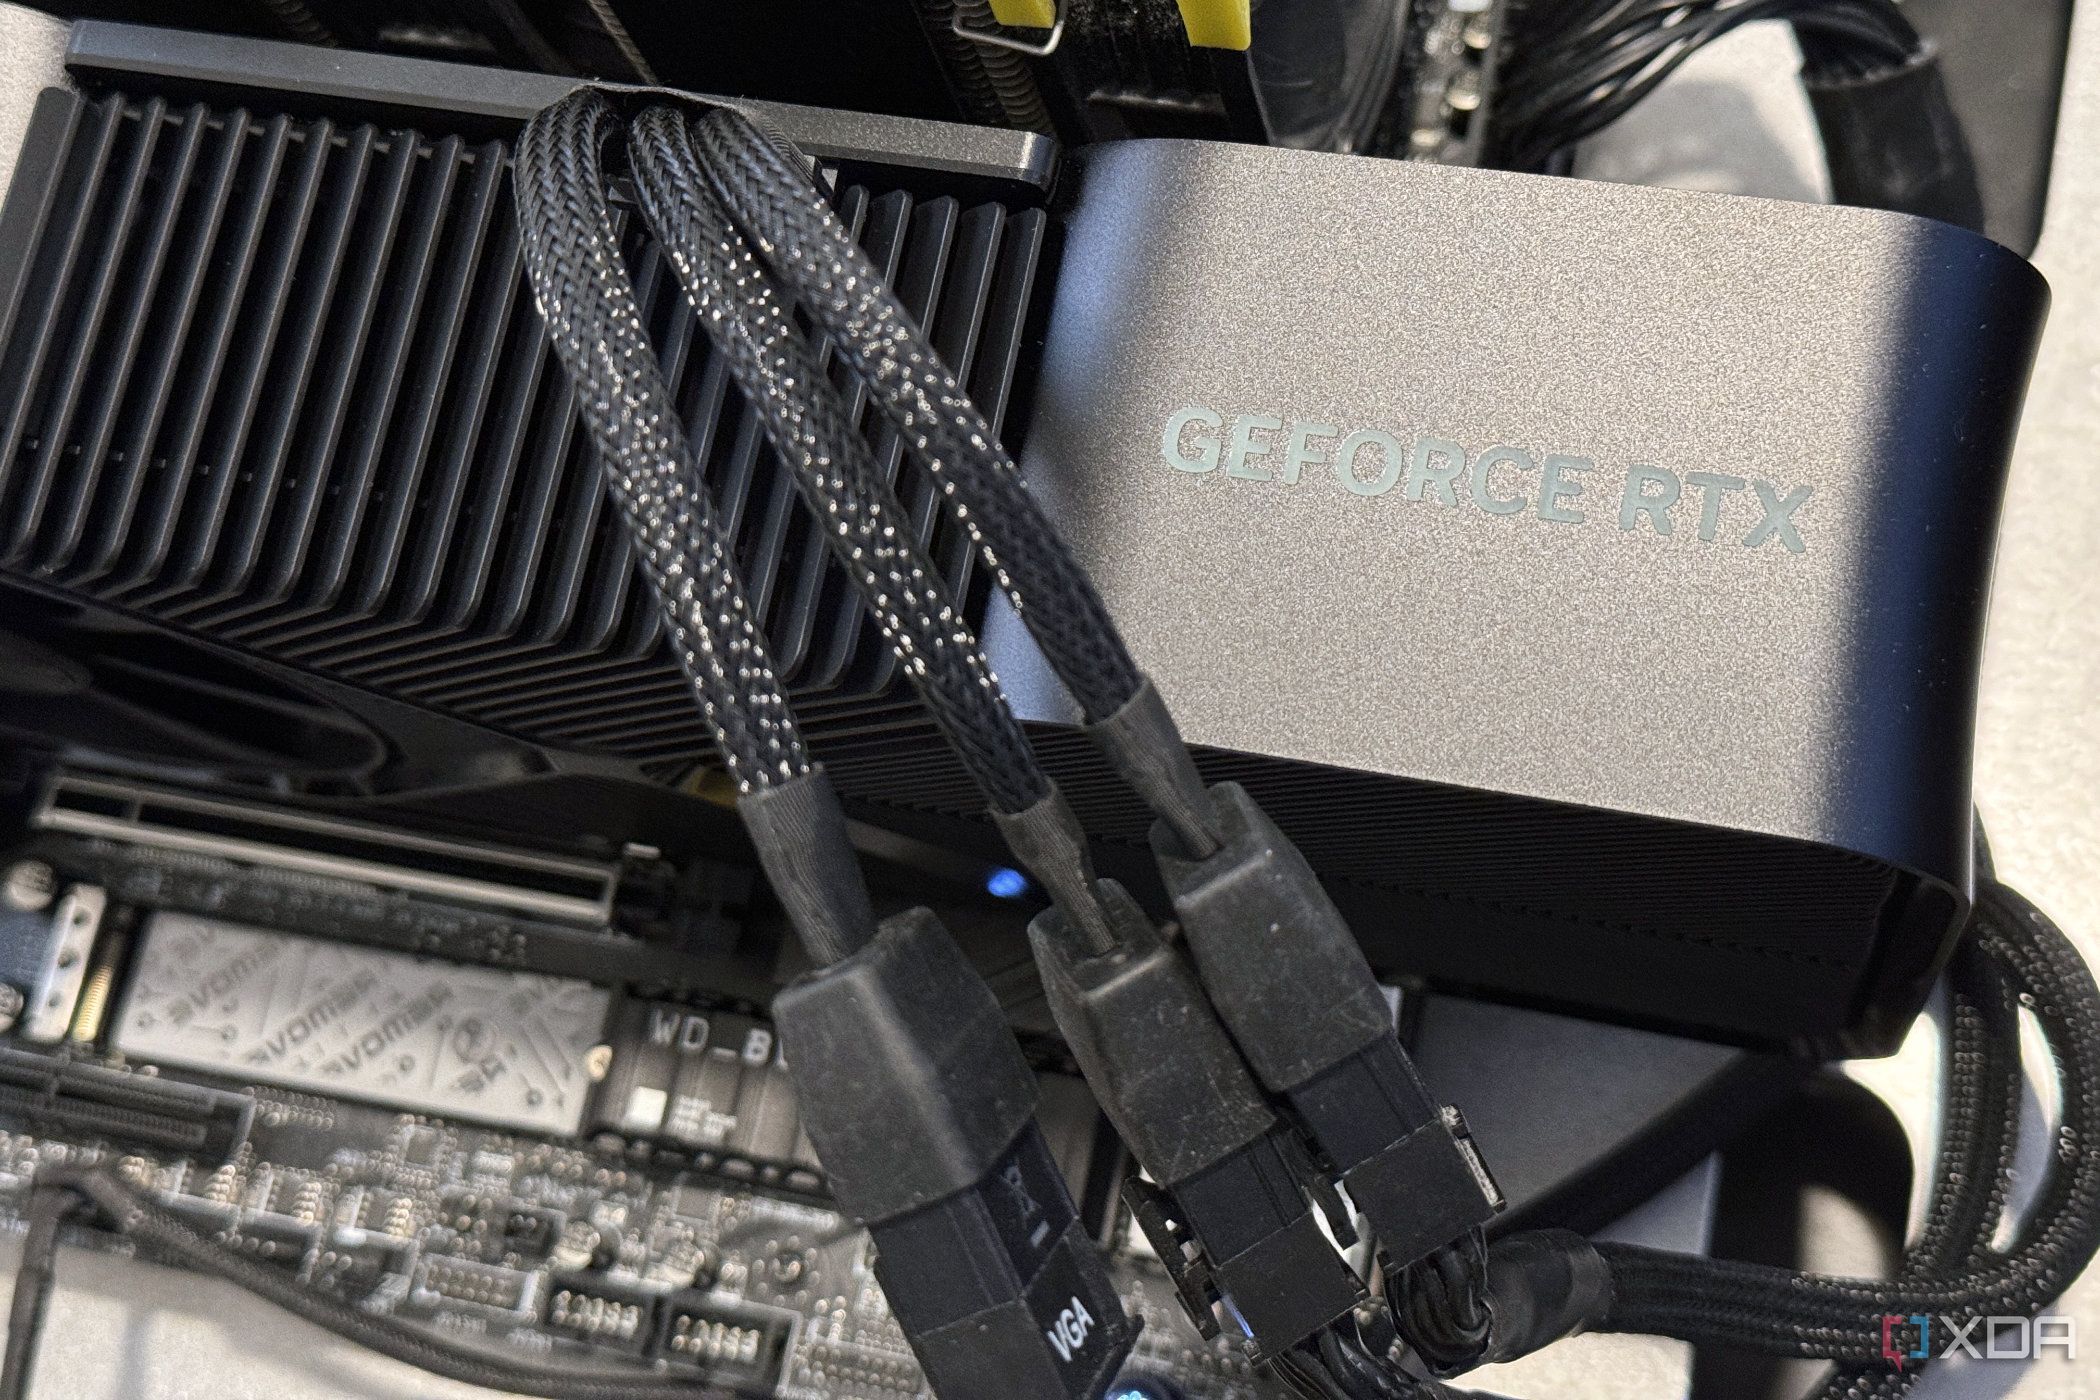 nvidia geforce rtx 4080 super graphics card installed in a motherboard showing three power cables going into its power adapter